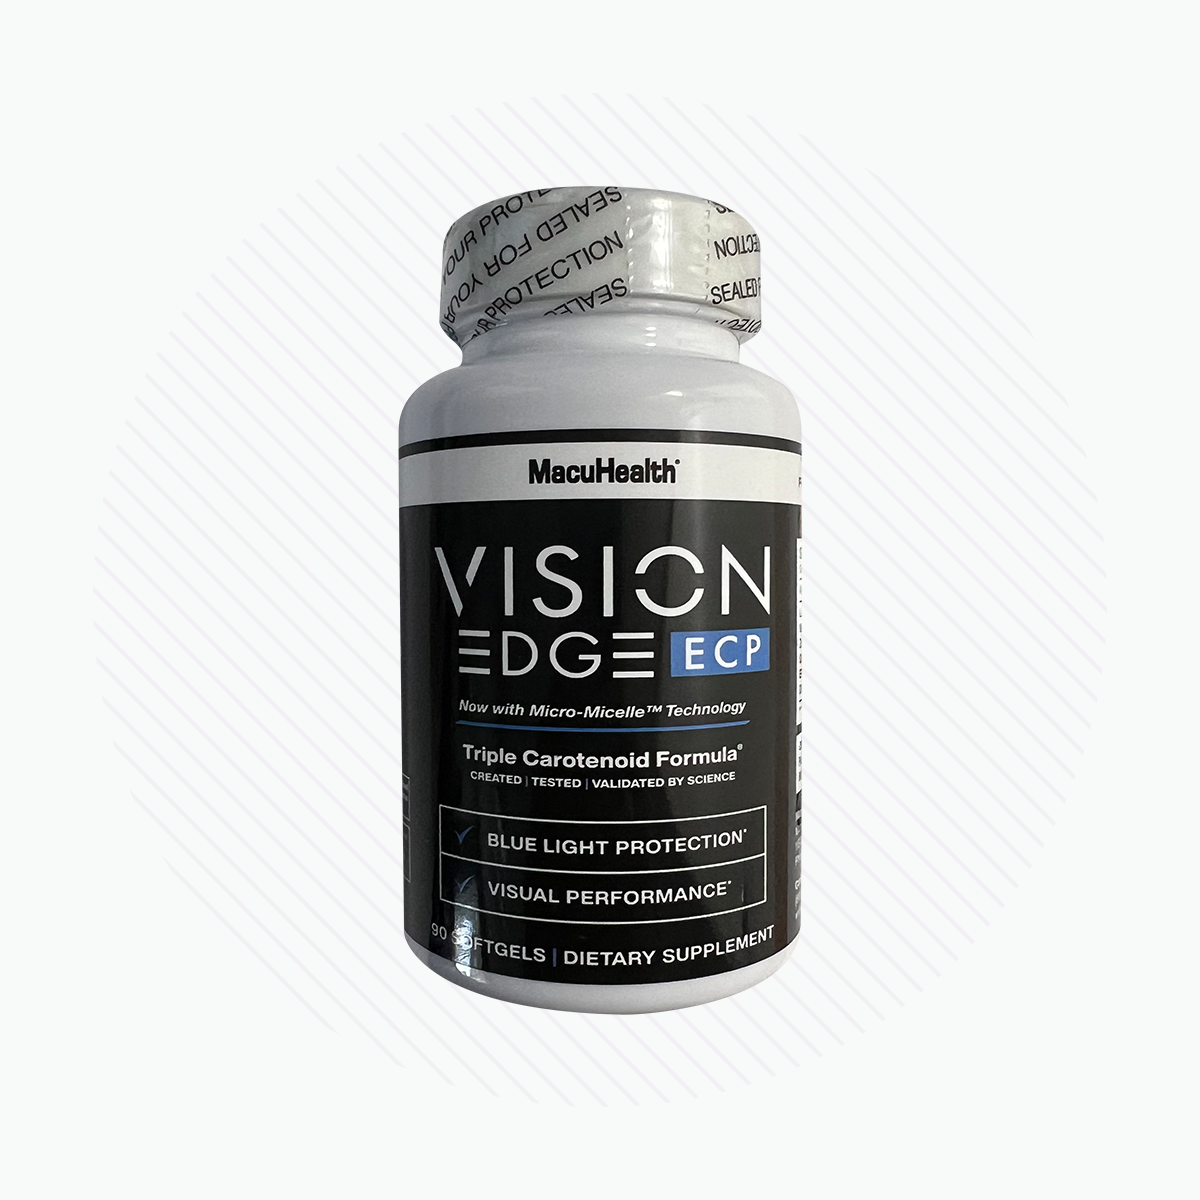 MacuHealth Vision Edge ECP Pro for Visual Enhancement - 90 Day Supply